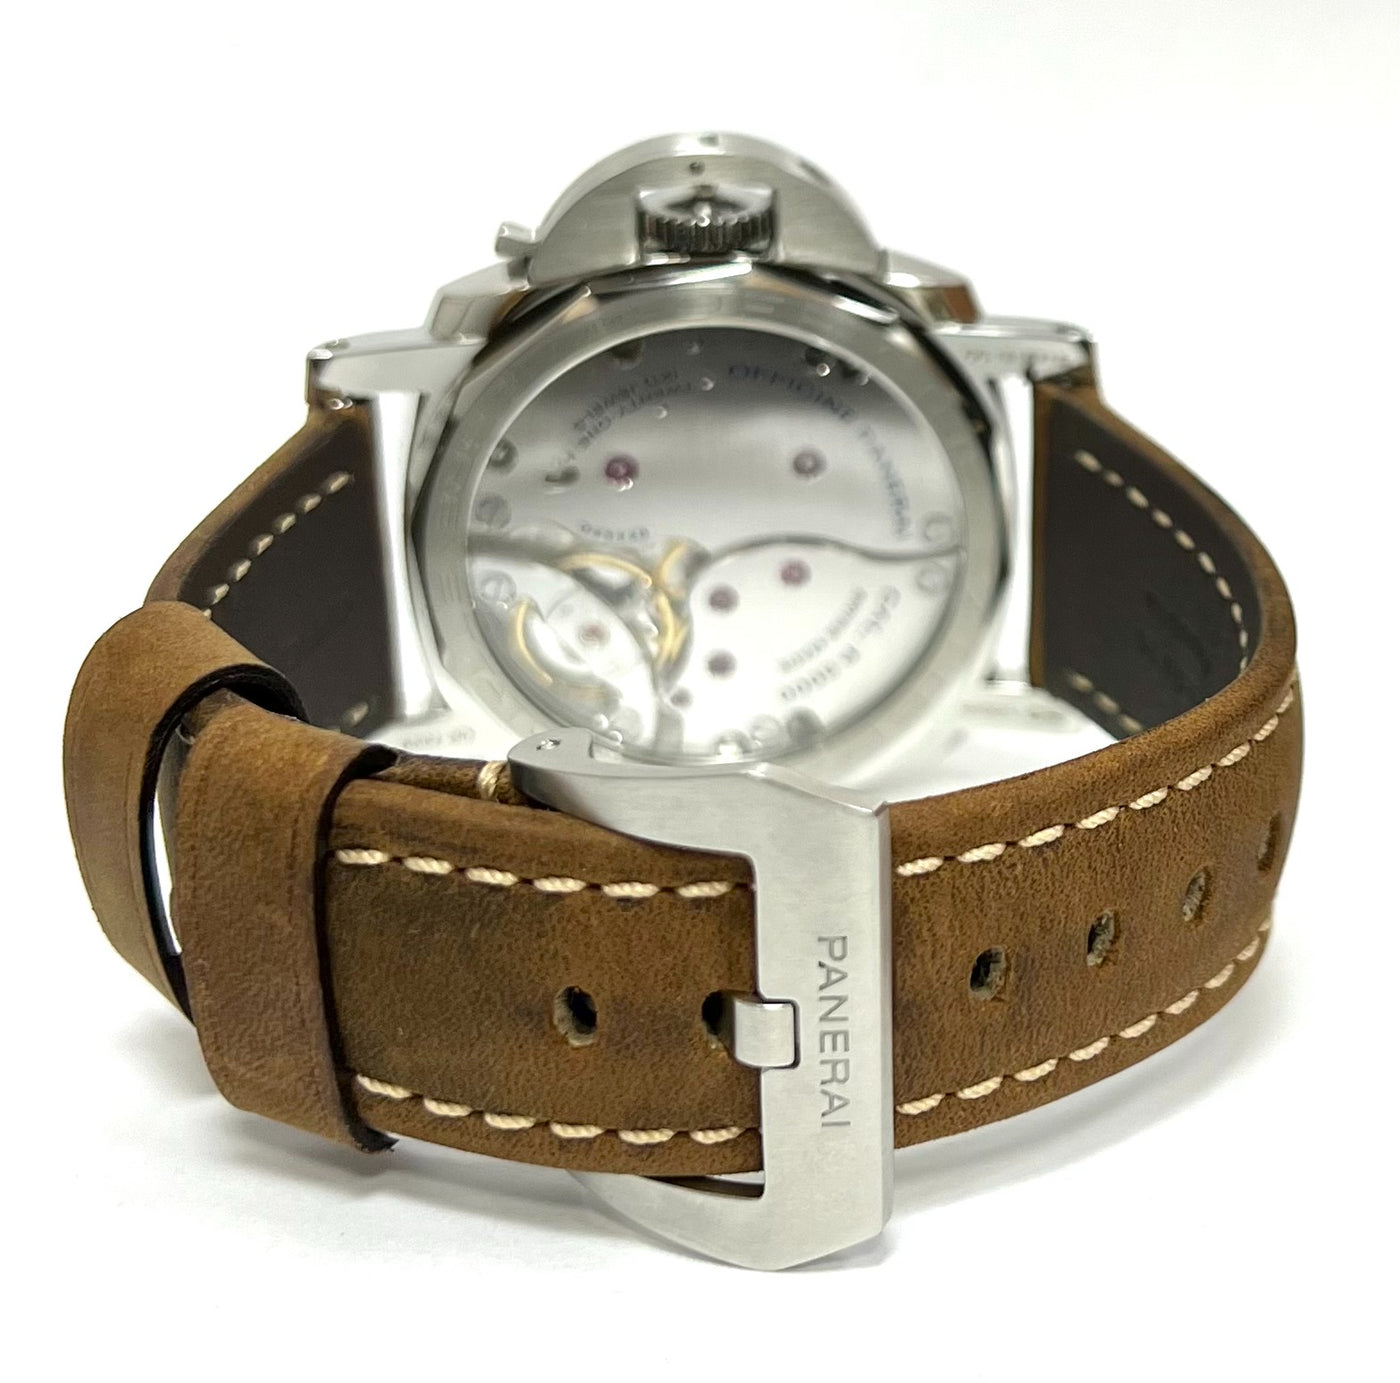 Panerai Luminor Left Hand Special Edition Stainless Steel 47mm